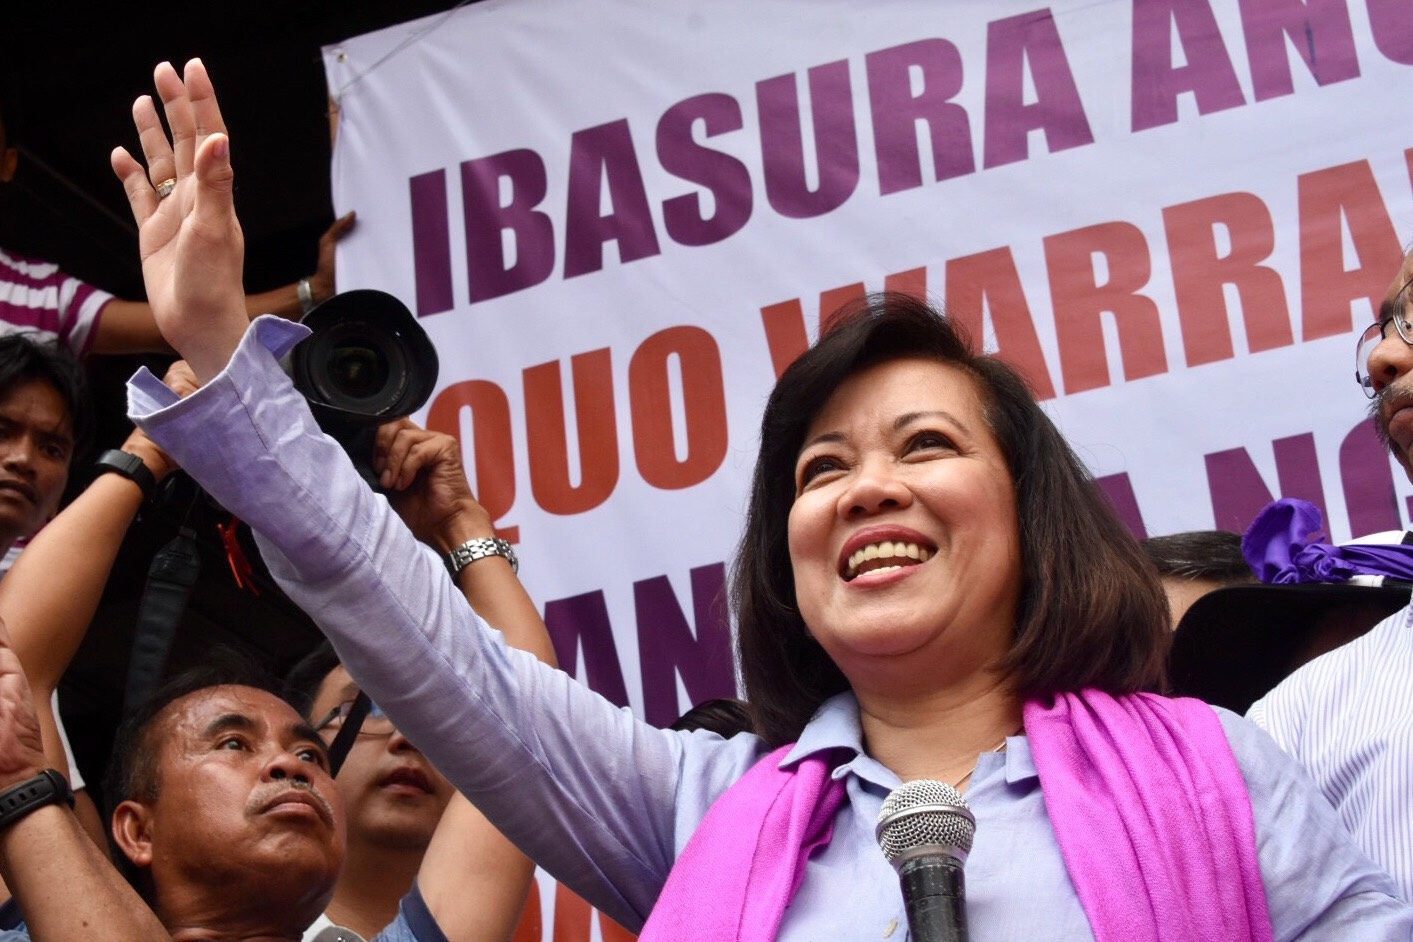 [OPINION] On the ouster of Chief Justice: Sereno served with honor and competence